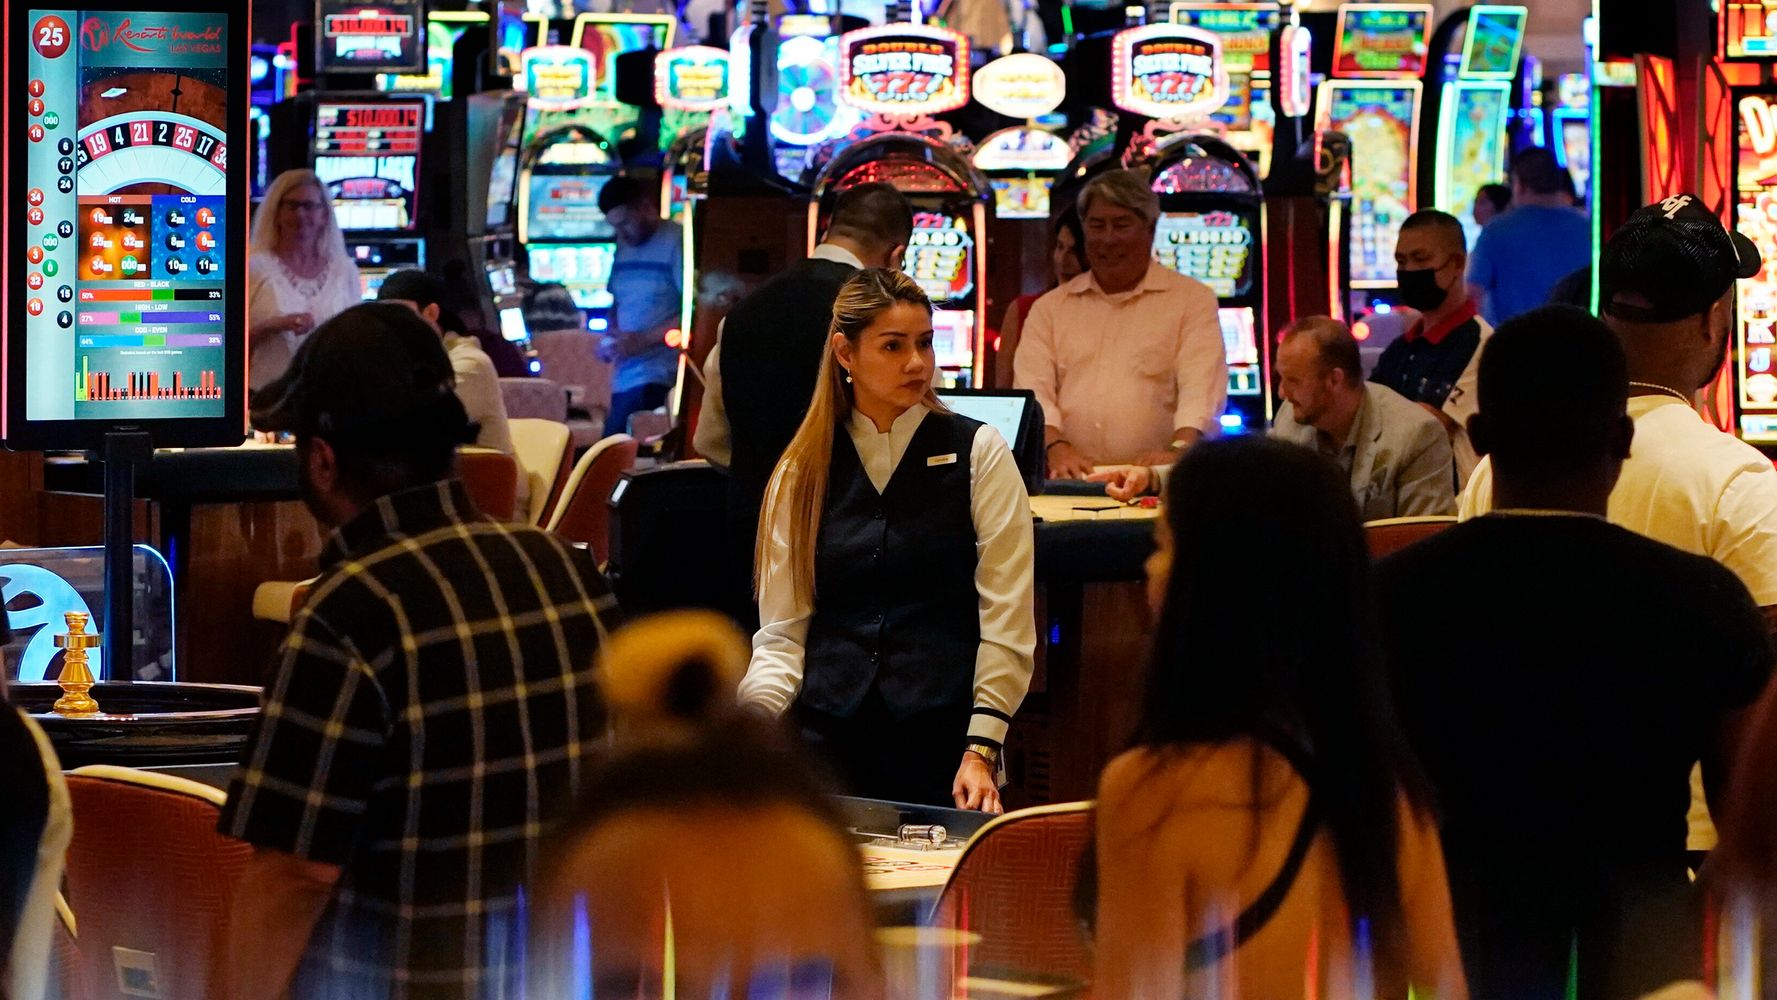 Vegas Workers Required To Mask Up, But Tourists Given Free Pass